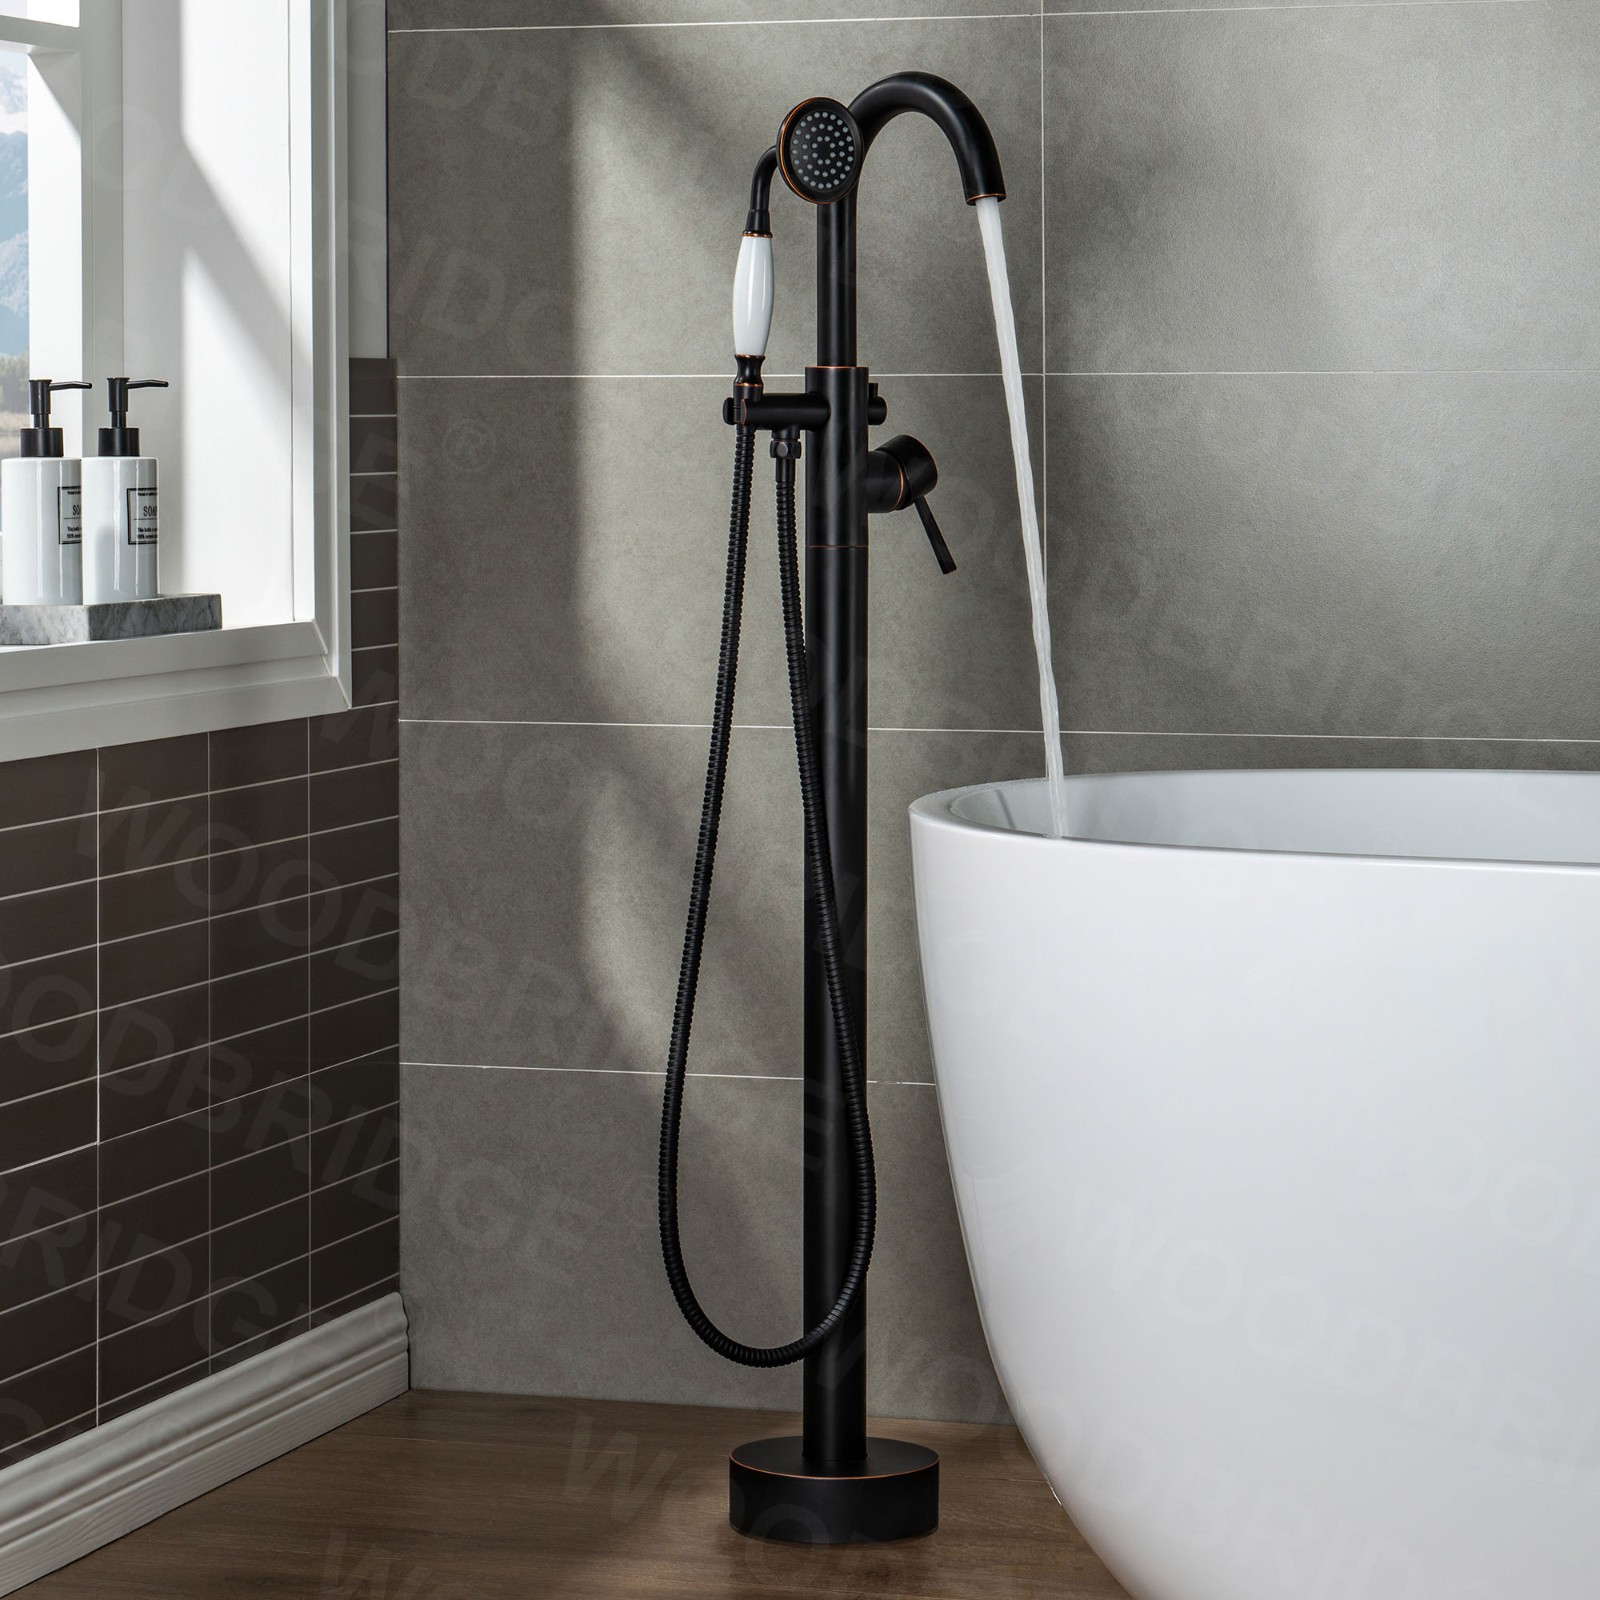  WOODBRIDGE Contemporary Single Handle Floor Mount Freestanding Tub Filler Faucet with Hand Shower in (Oil Rubbed Bronze) Finish,F0010ORBVT_6053